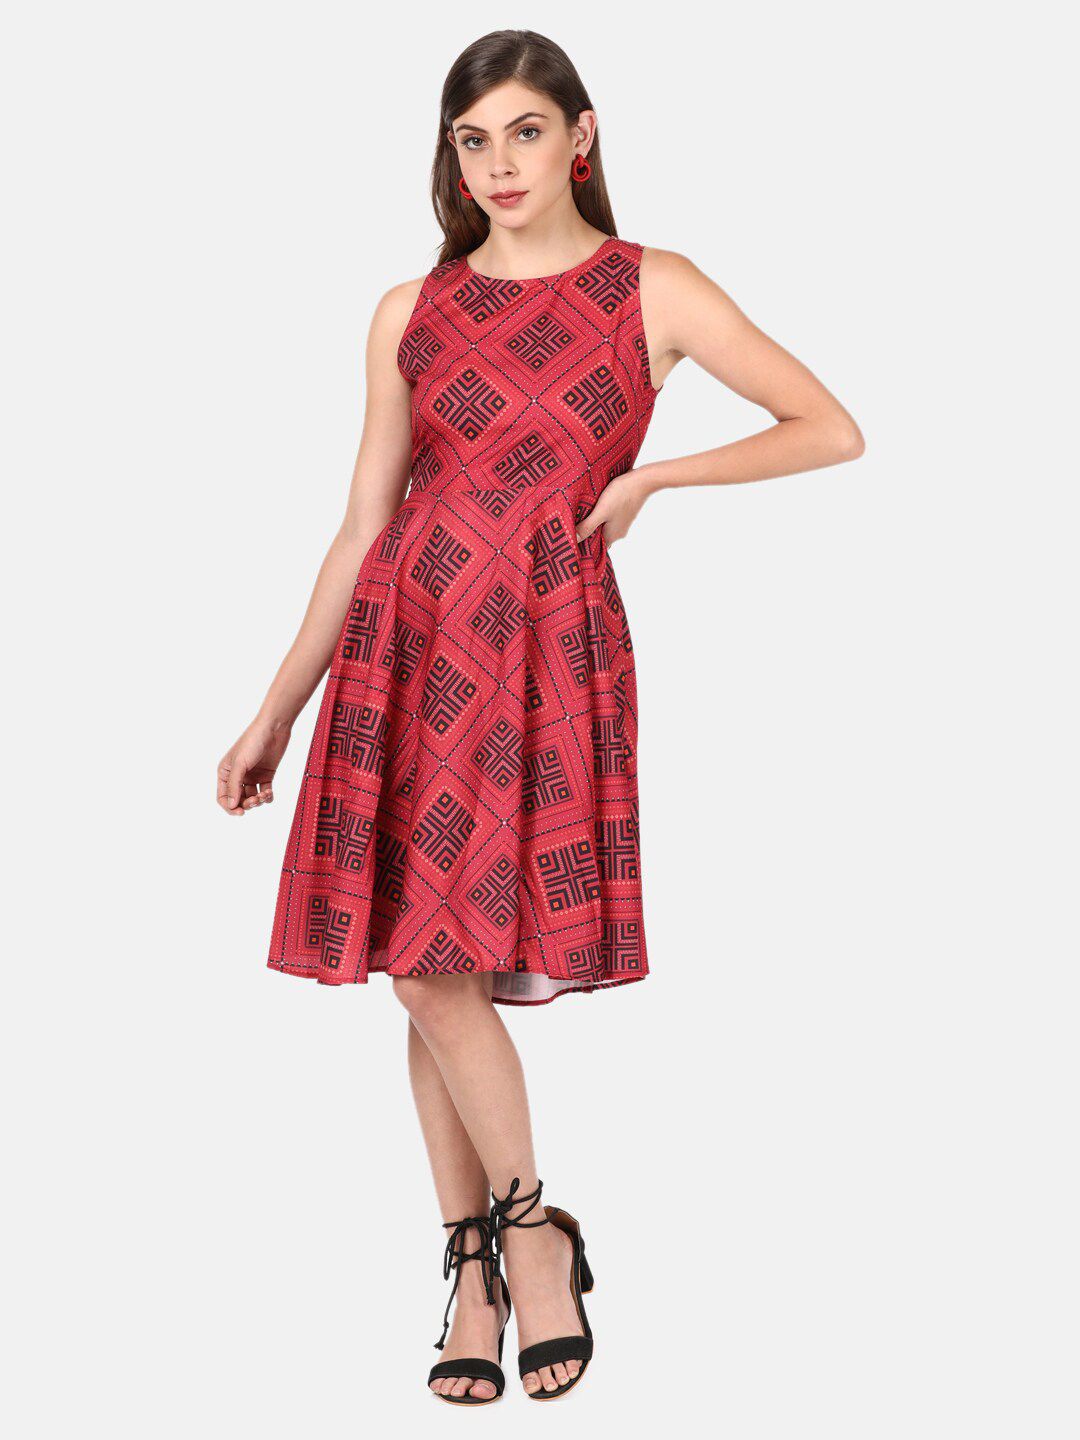 UNTUNG Red & Black Cotton Dress Price in India